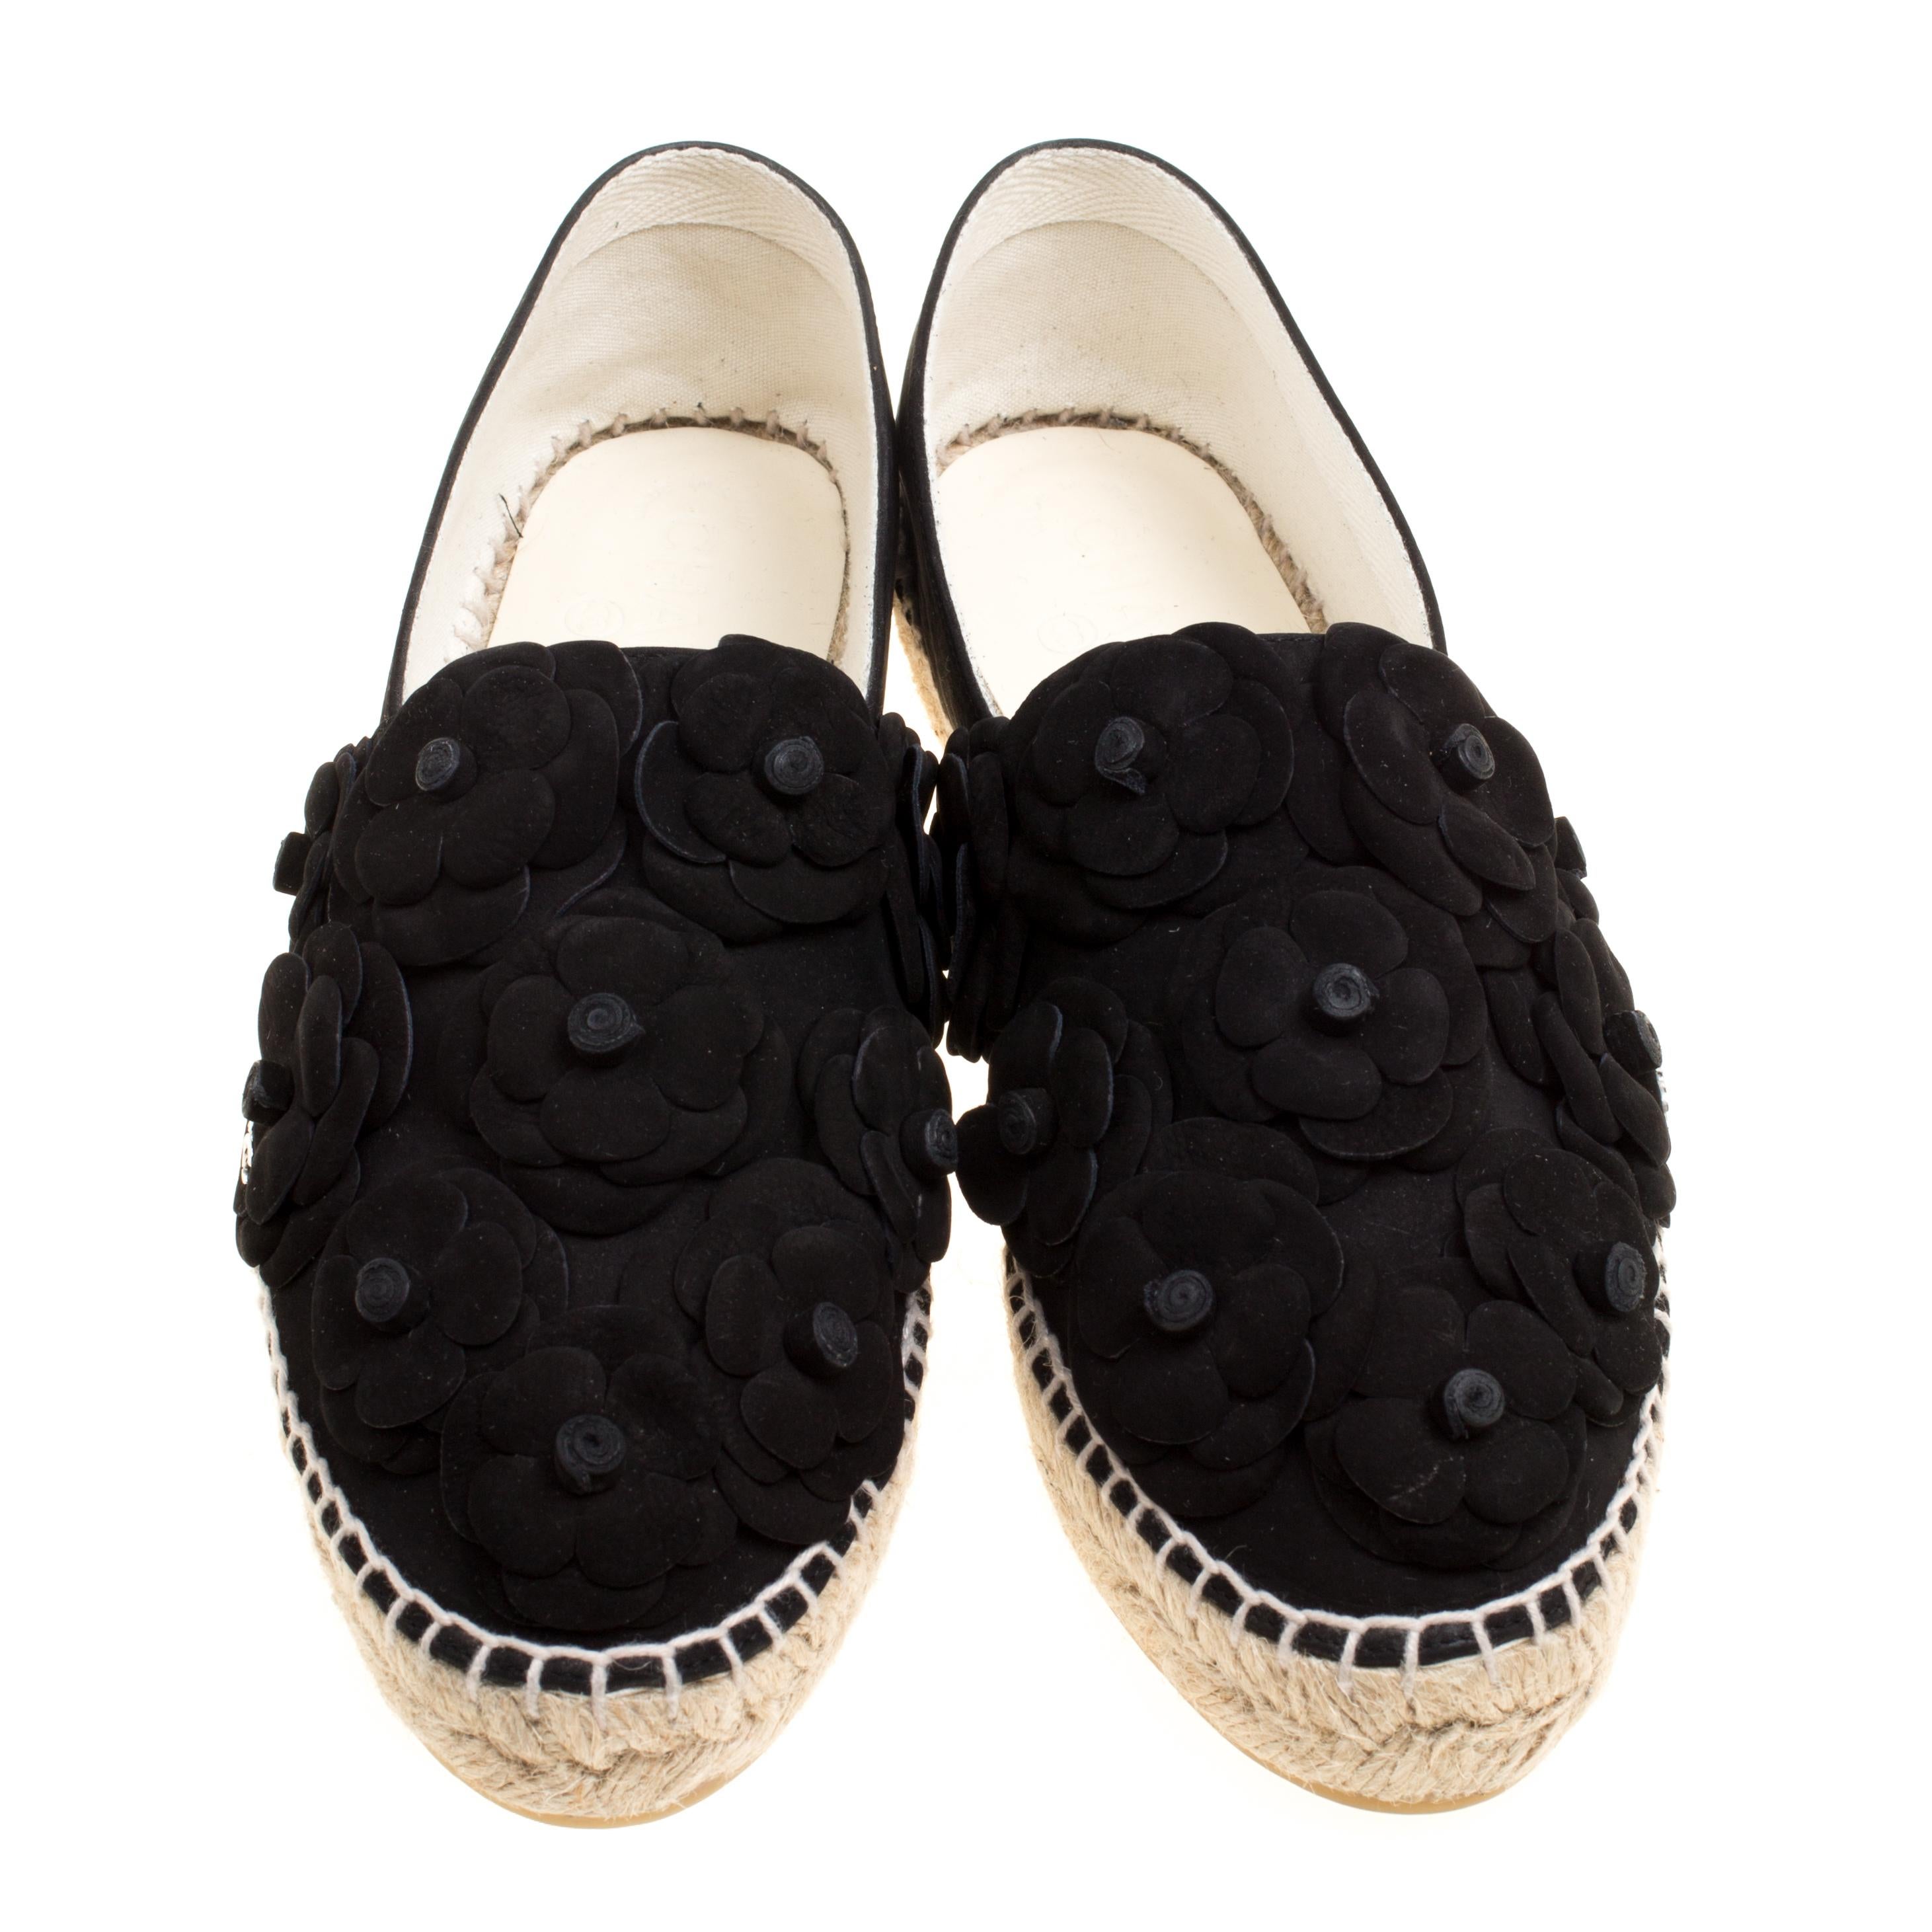 Espadrilles are not just stylish, but also comfortable and easy to wear. This lovely pair from Chanel's 2017 Cruise Collection will accompany a casual outfit with perfection. They are made of suede and detailed with Camellia appliques on the